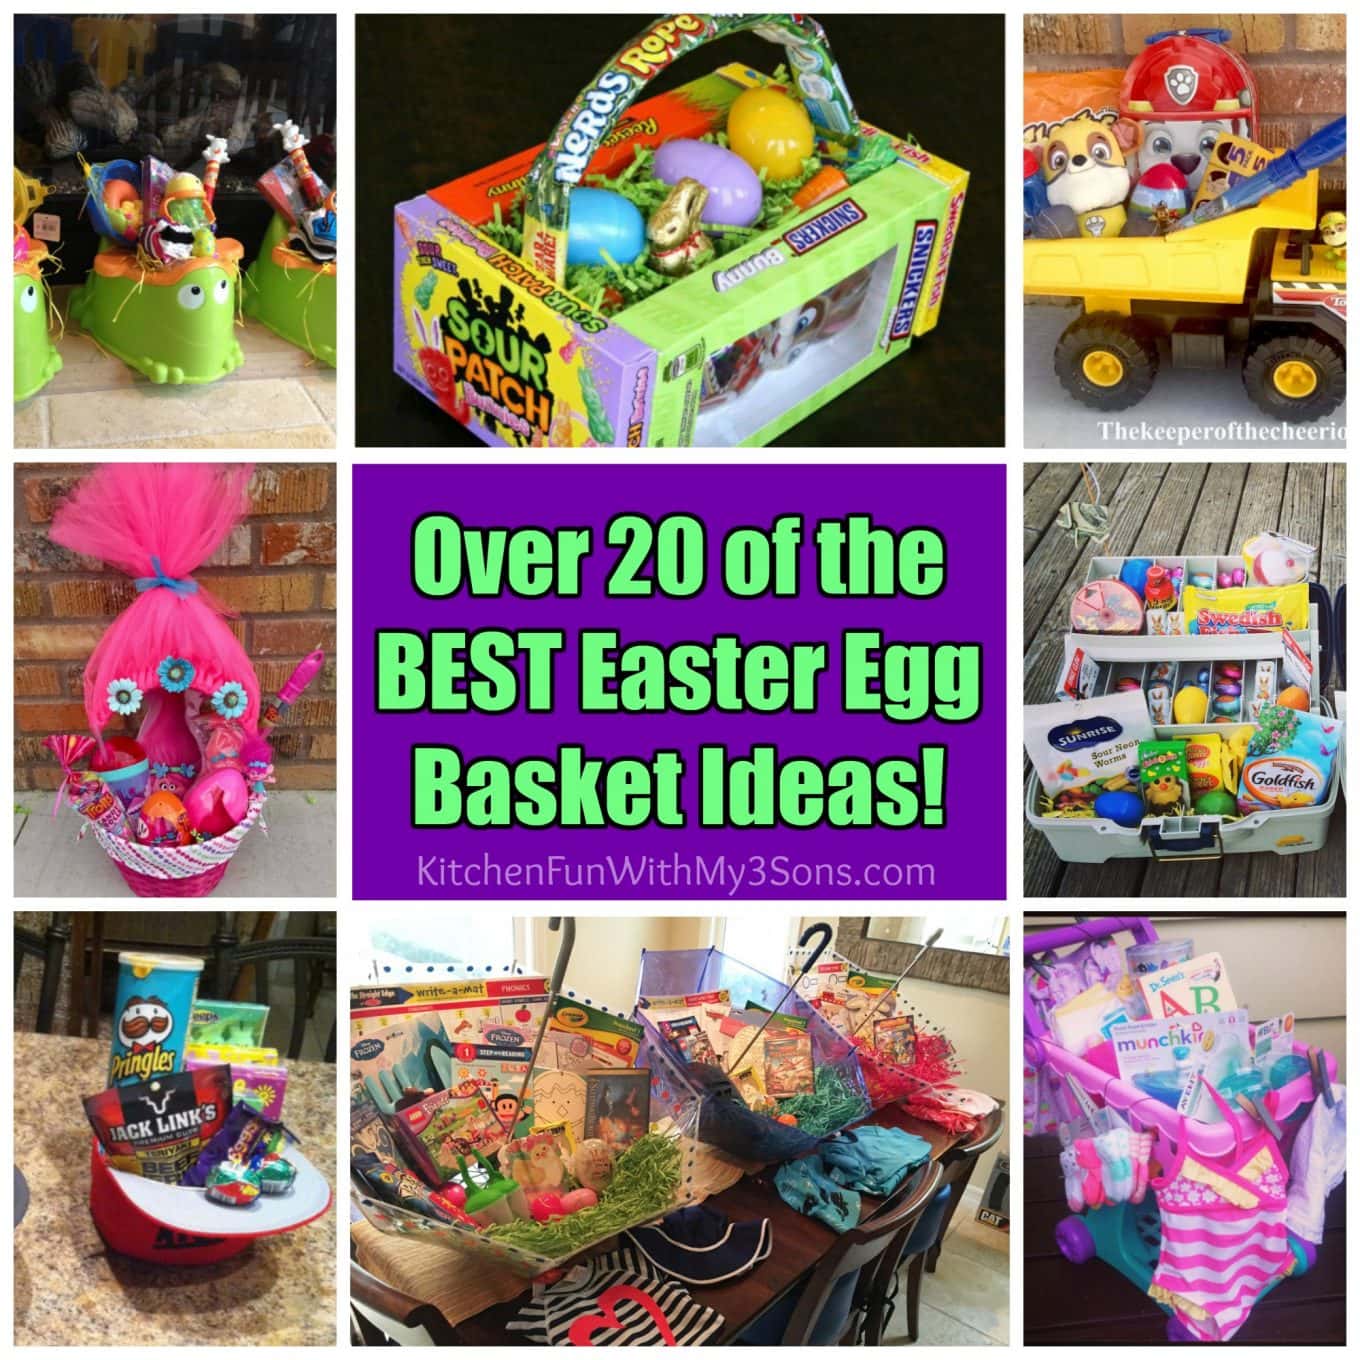 45 Best Easter Gift Ideas - The WoW Style